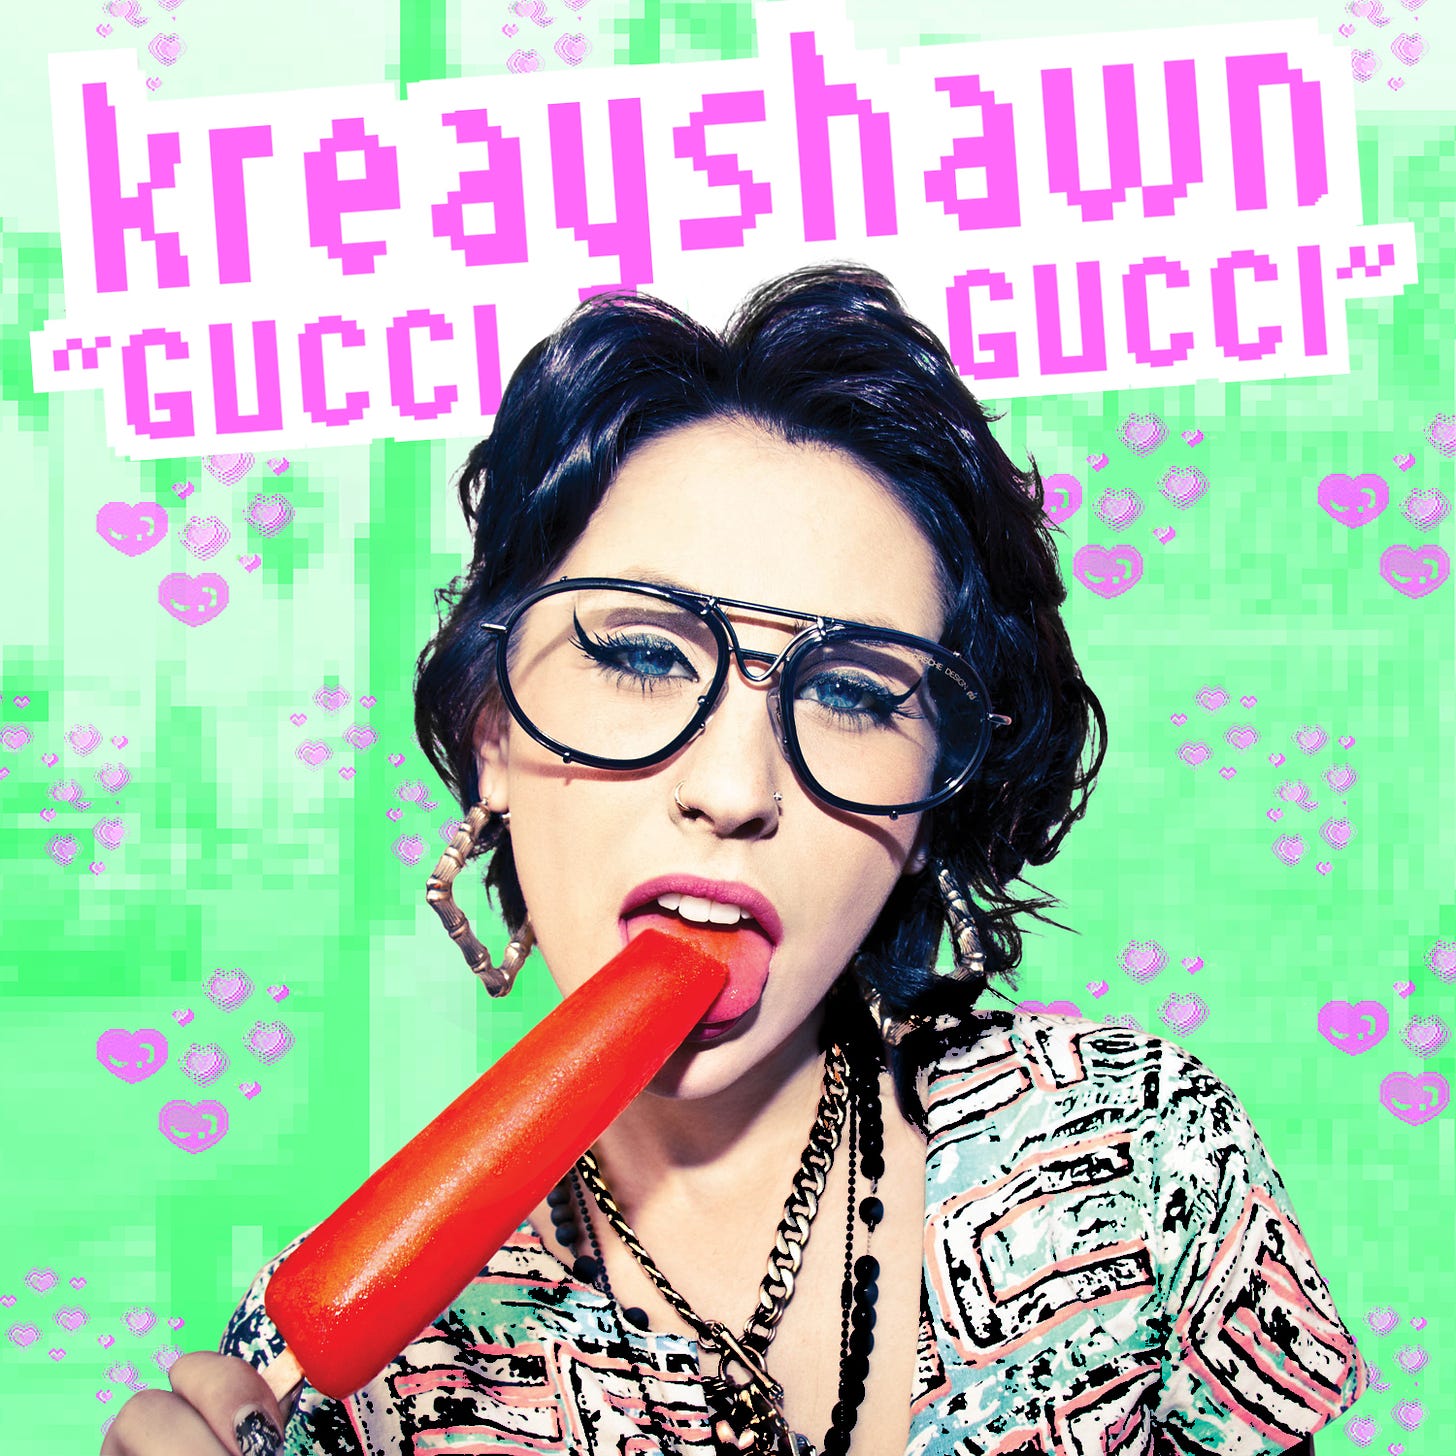 STRAPLONDON: Kreayshawn’s Gucci Gucci gets us going!